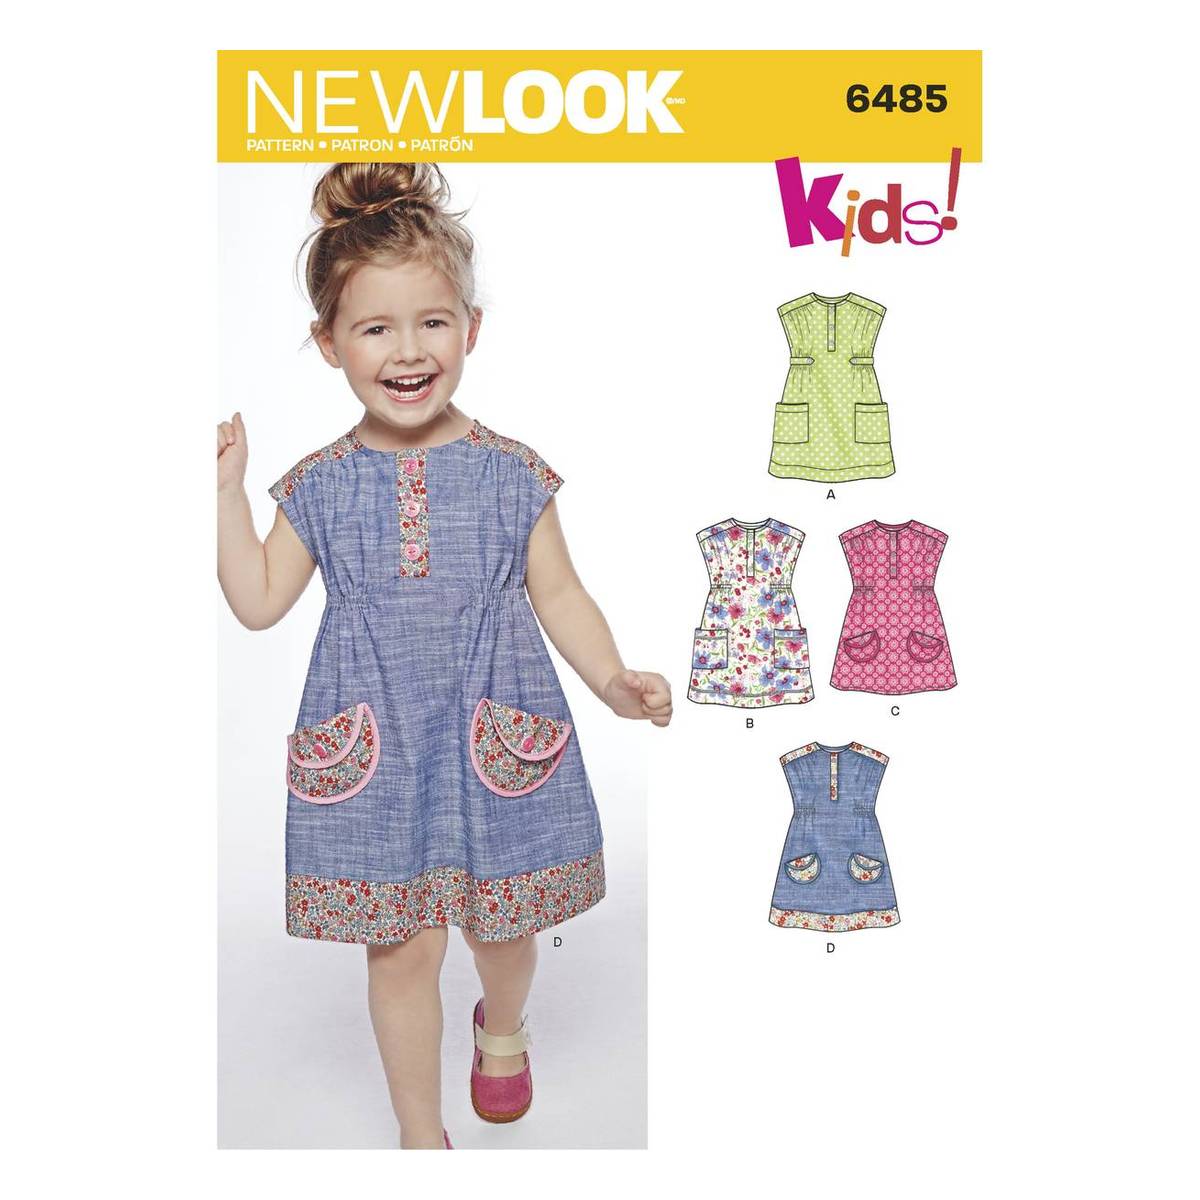 New Look Toddler's Dress Sewing Pattern 6485 | Hobbycraft